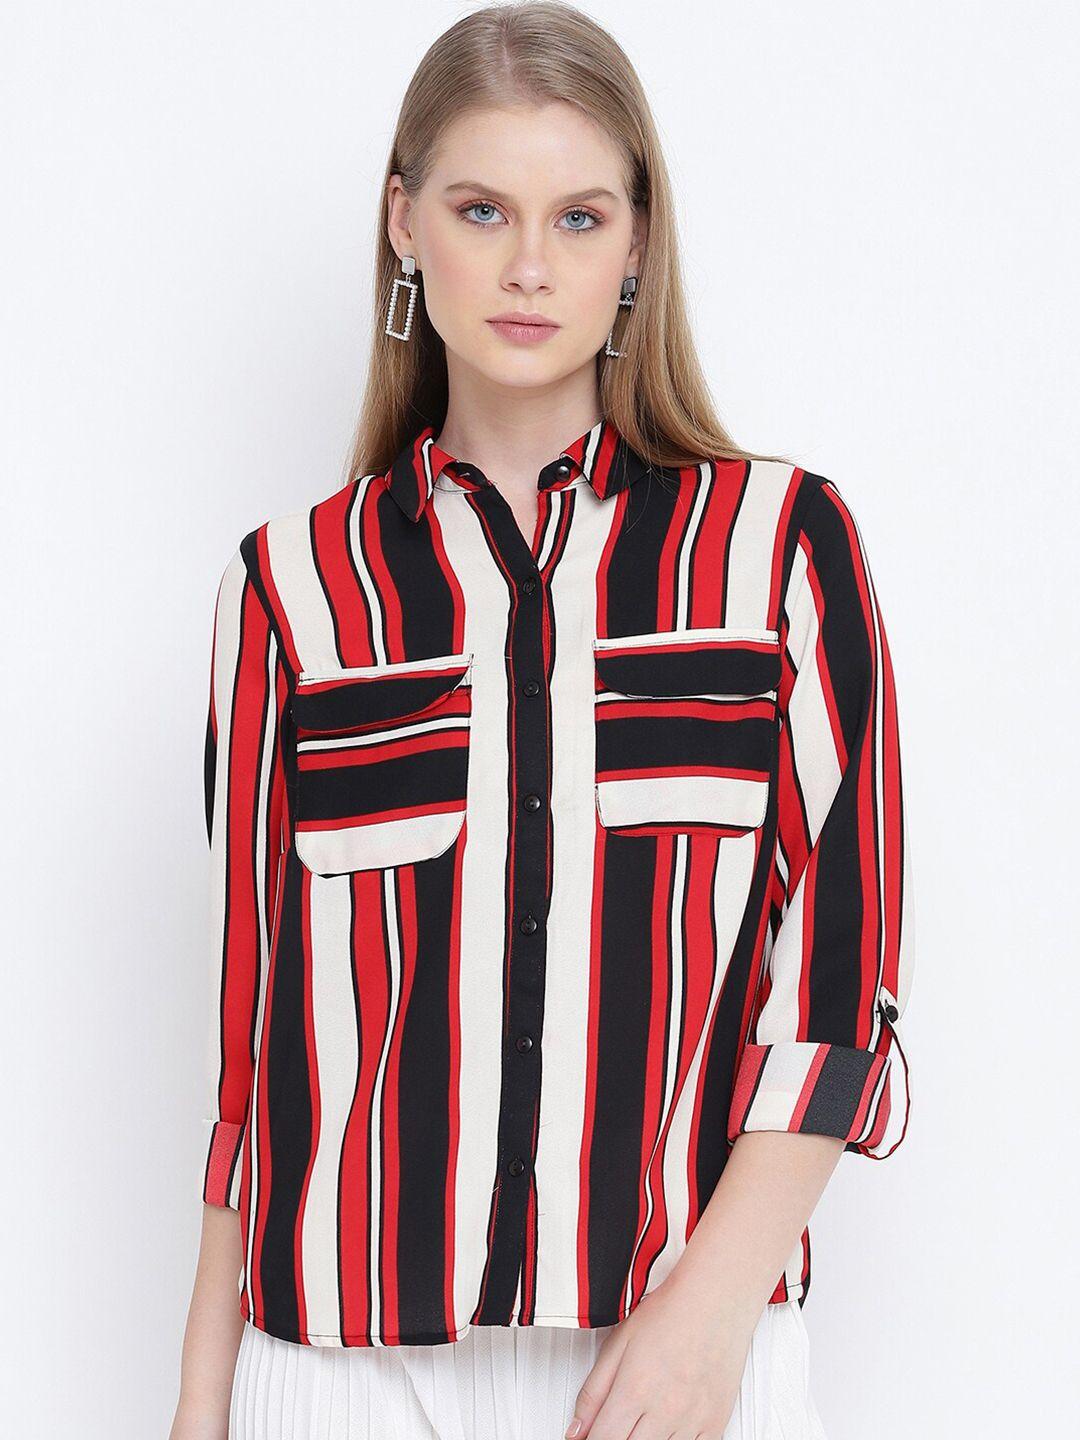 oxolloxo multicoloured striped roll-up sleeves shirt style top